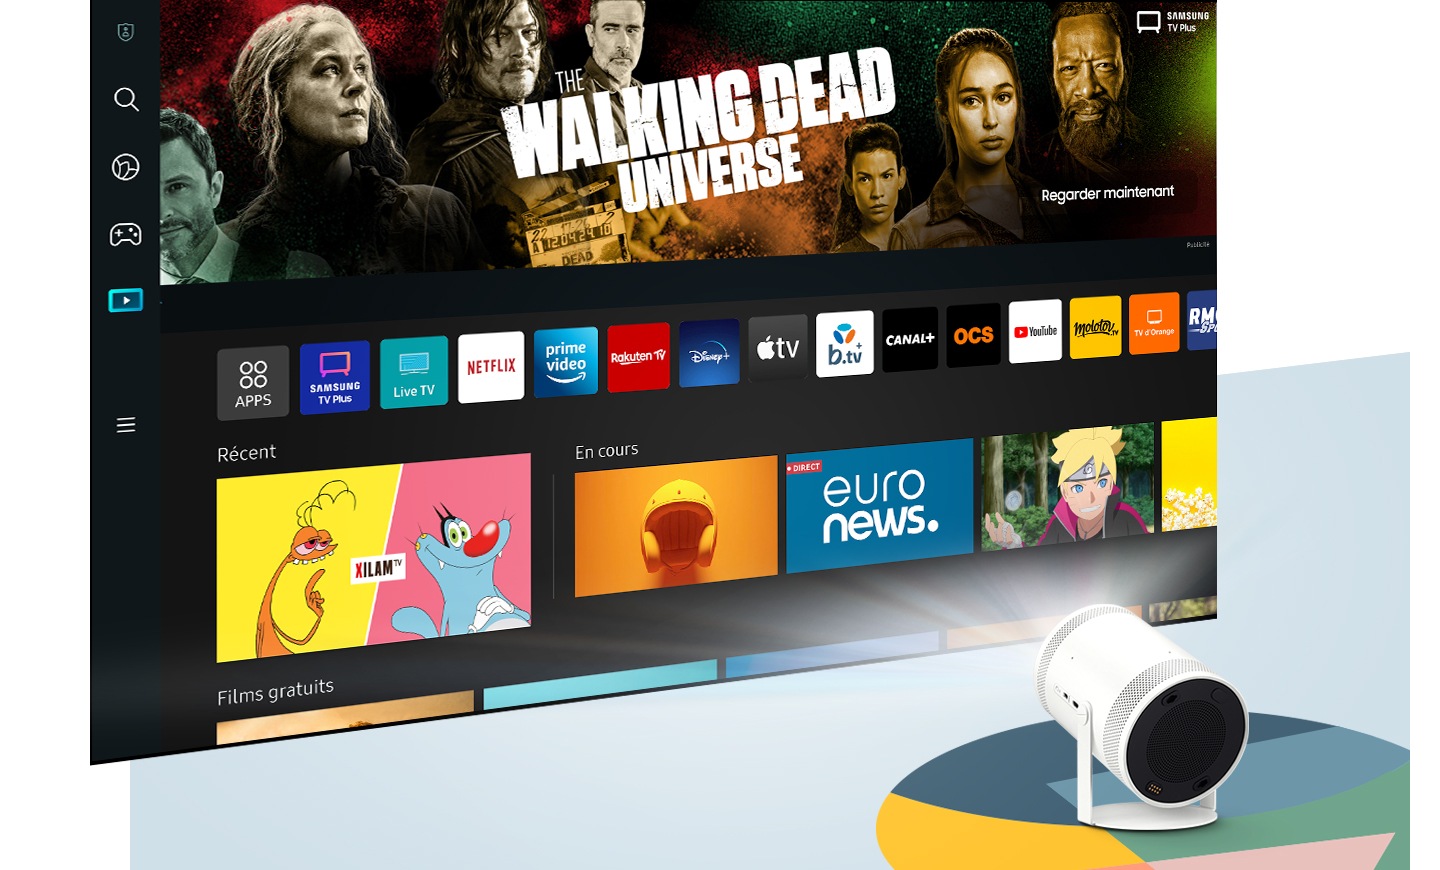 The Freestyle casts the Smart TV GUI full of apps and shows.